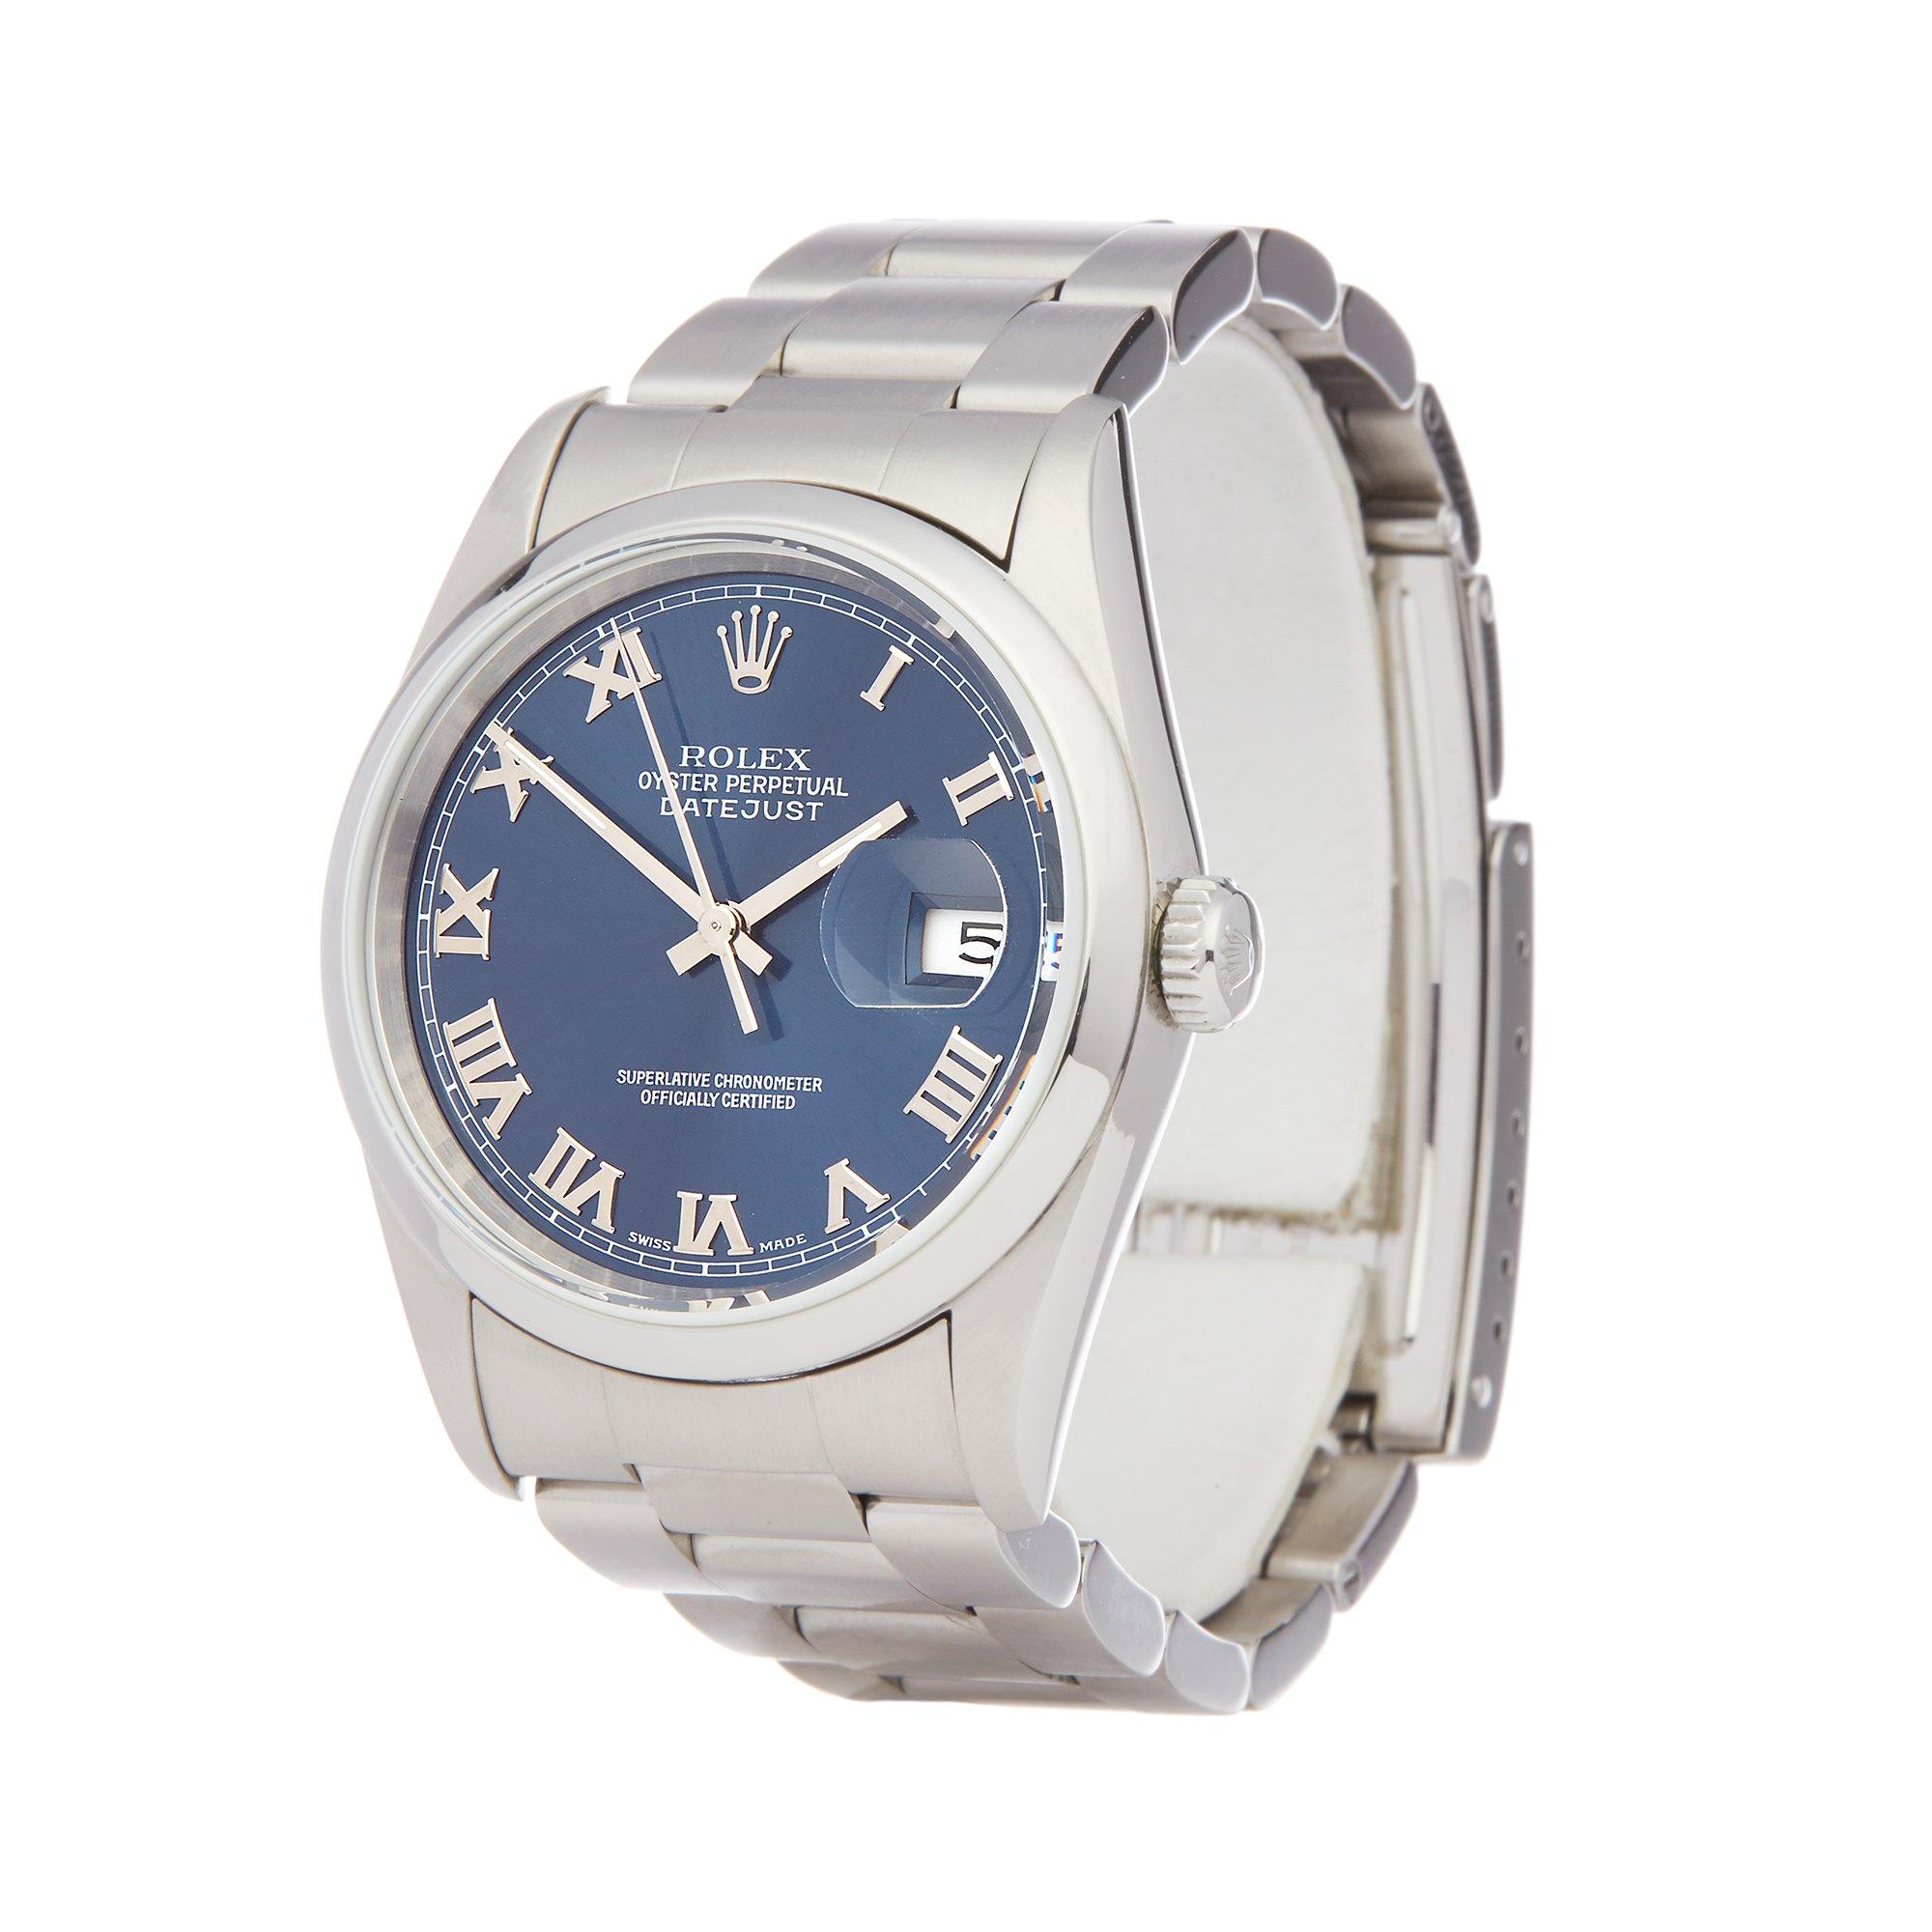 Xupes Reference: W007438
Manufacturer: Rolex
Model: Datejust
Model Variant: 36
Model Number: 16200
Age: 1993
Gender: Men
Complete With: Rolex Box
Dial: Blue Roman
Glass: Sapphire Crystal
Case Size: 36mm
Case Material: Stainless Steel
Strap Material: